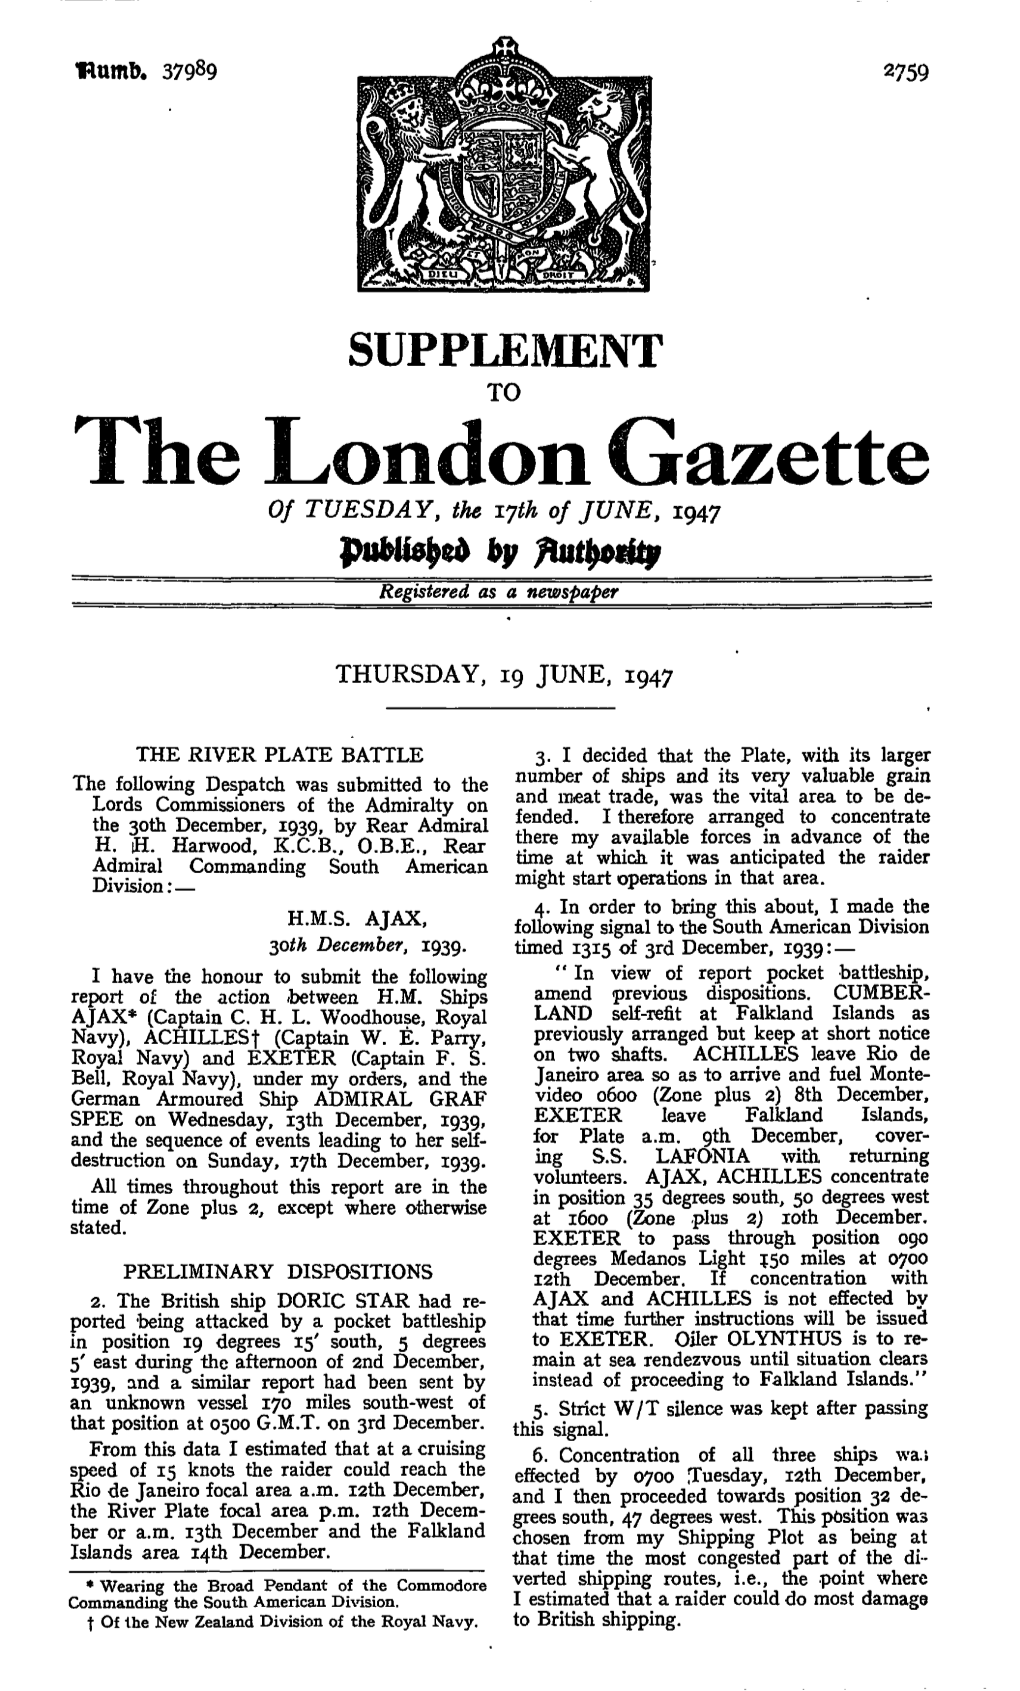 The London Gazette of TUESDAY, the 17^ of JUNE, 1947 by Registered As a Newspaper